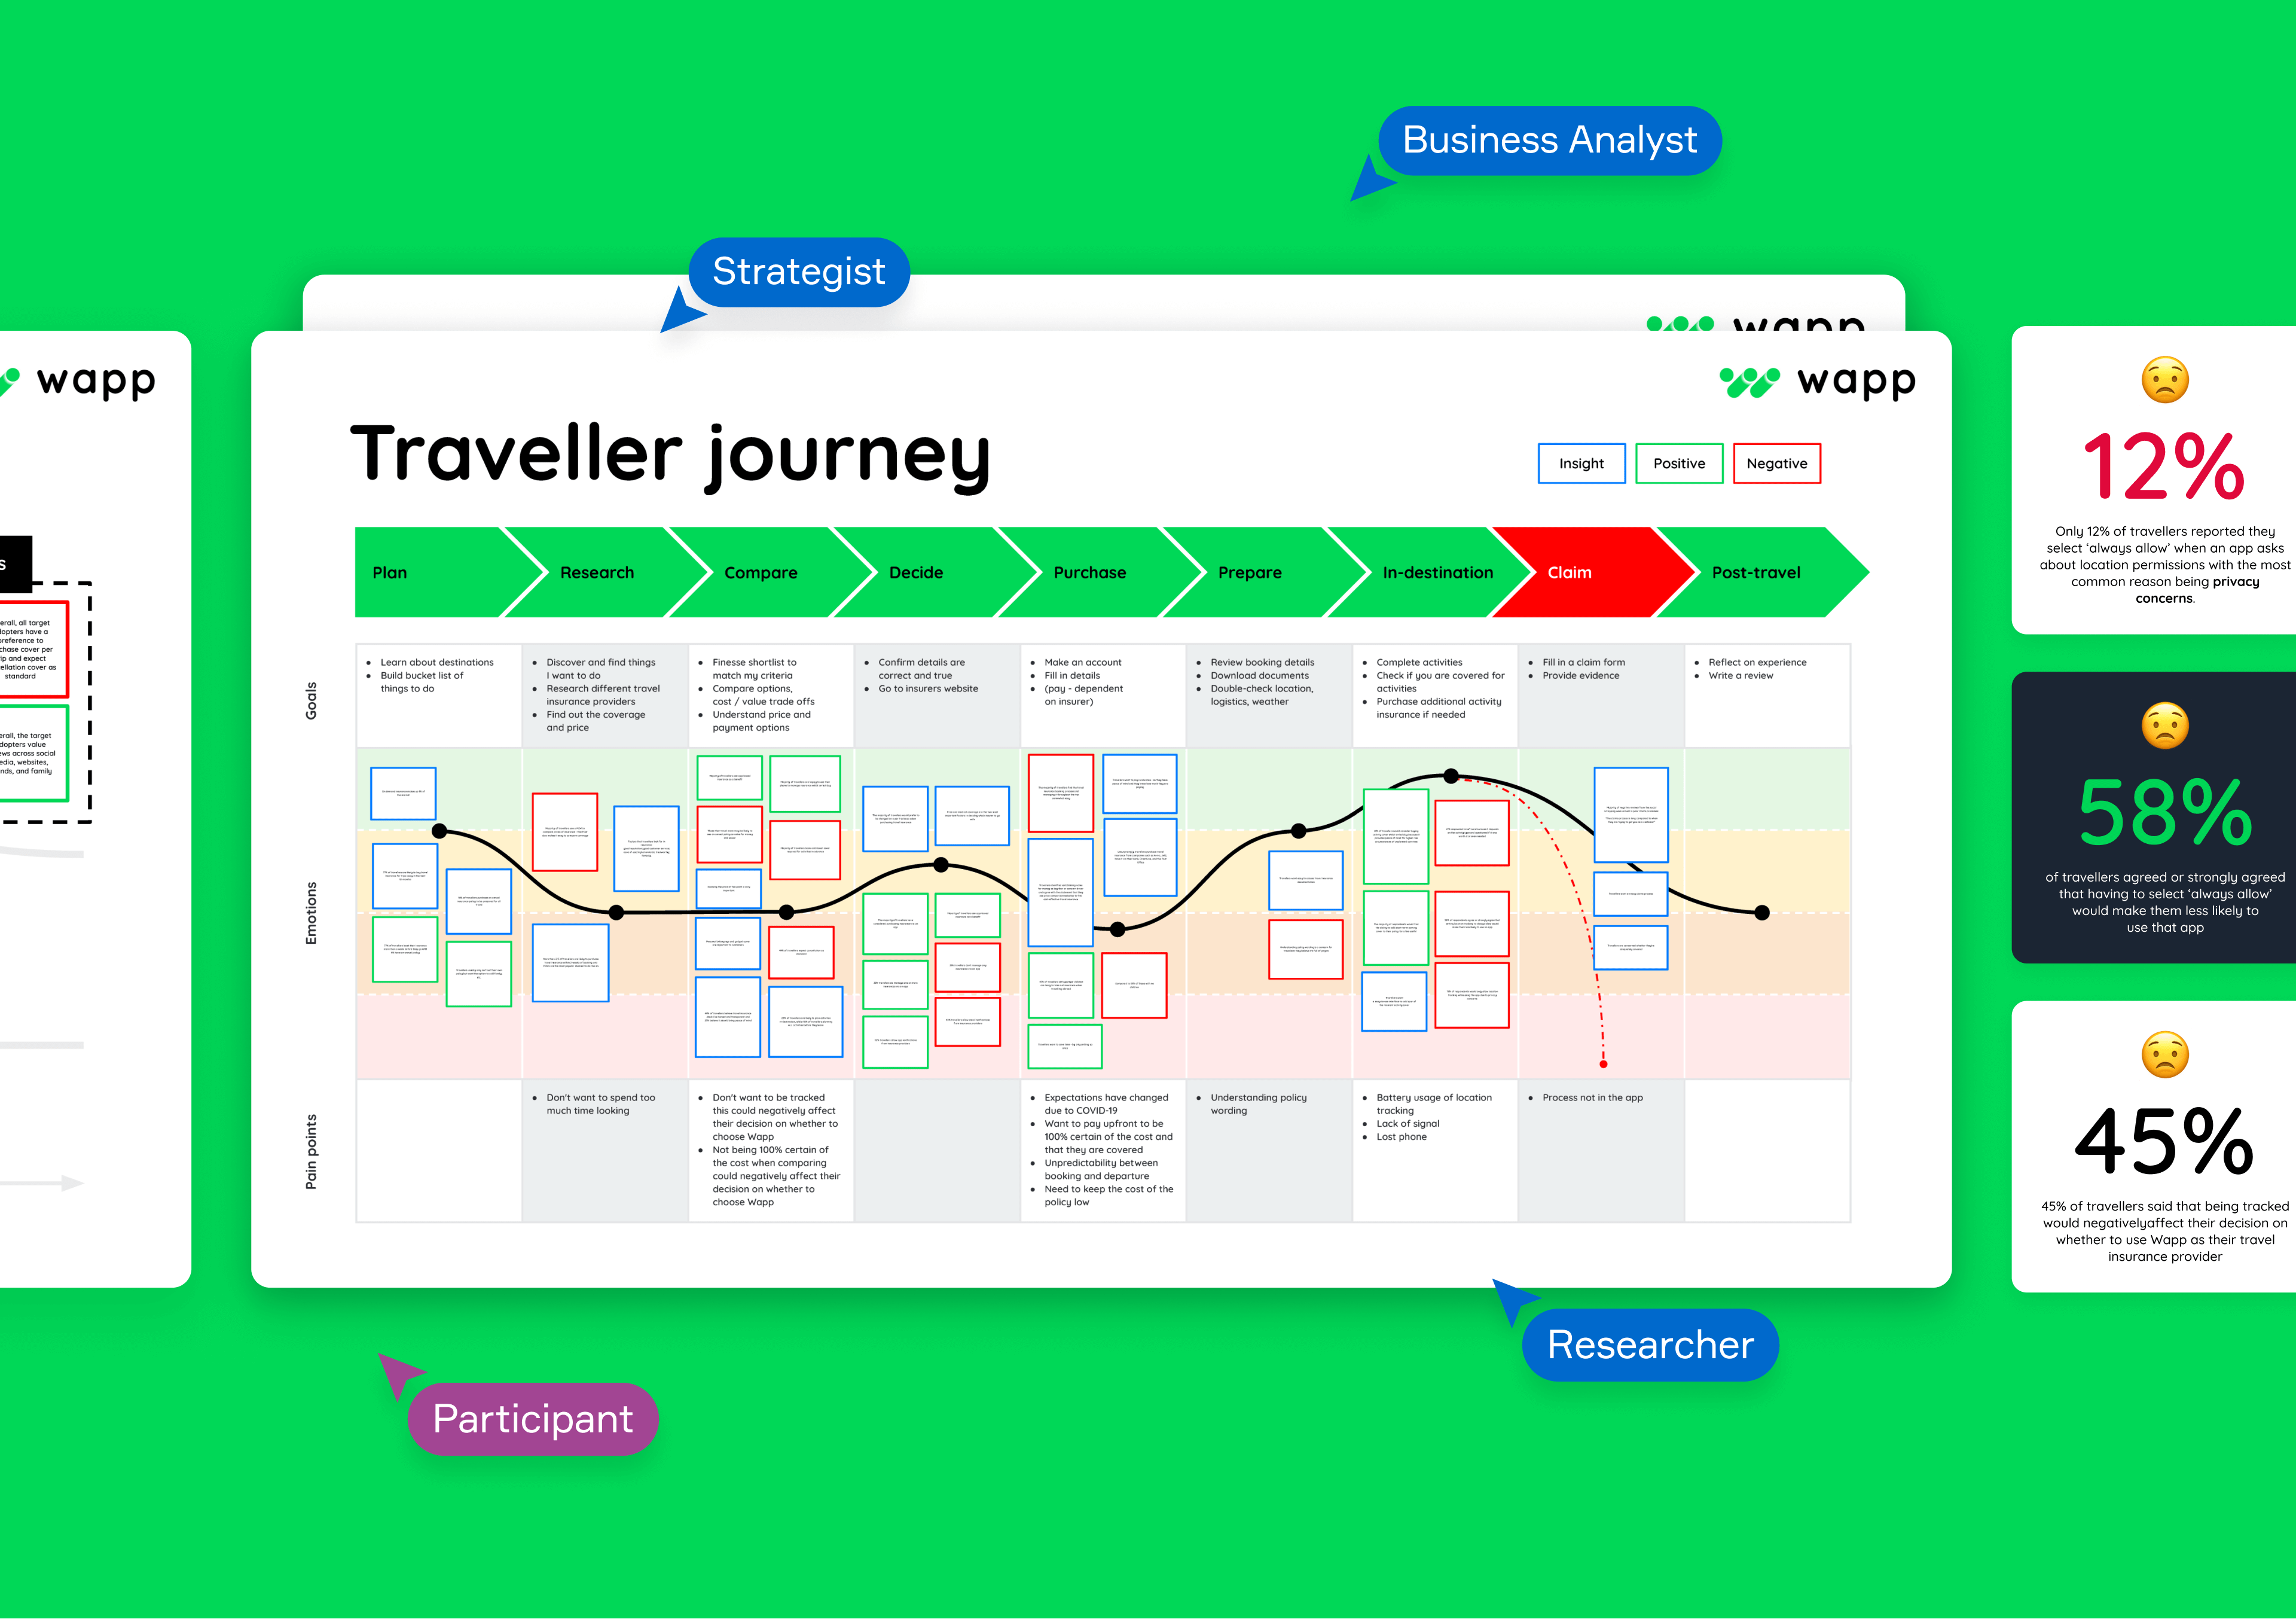 Customer journey map for Wapp showing how travellers think about and buy travel insurance